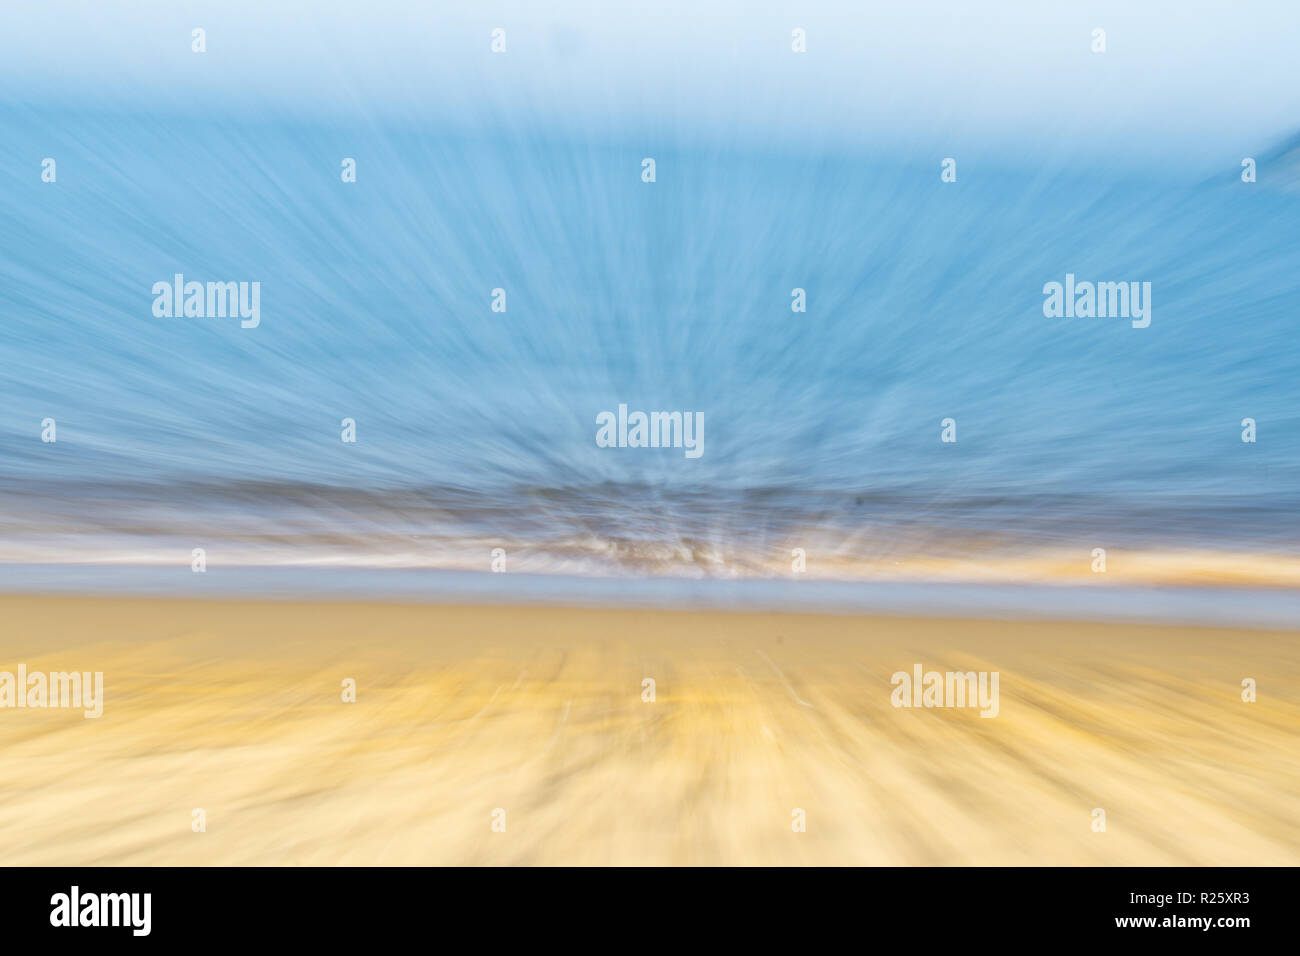 Coastal abstract golden sand blue water and pale sky in zoom blur for backgrounds Stock Photo